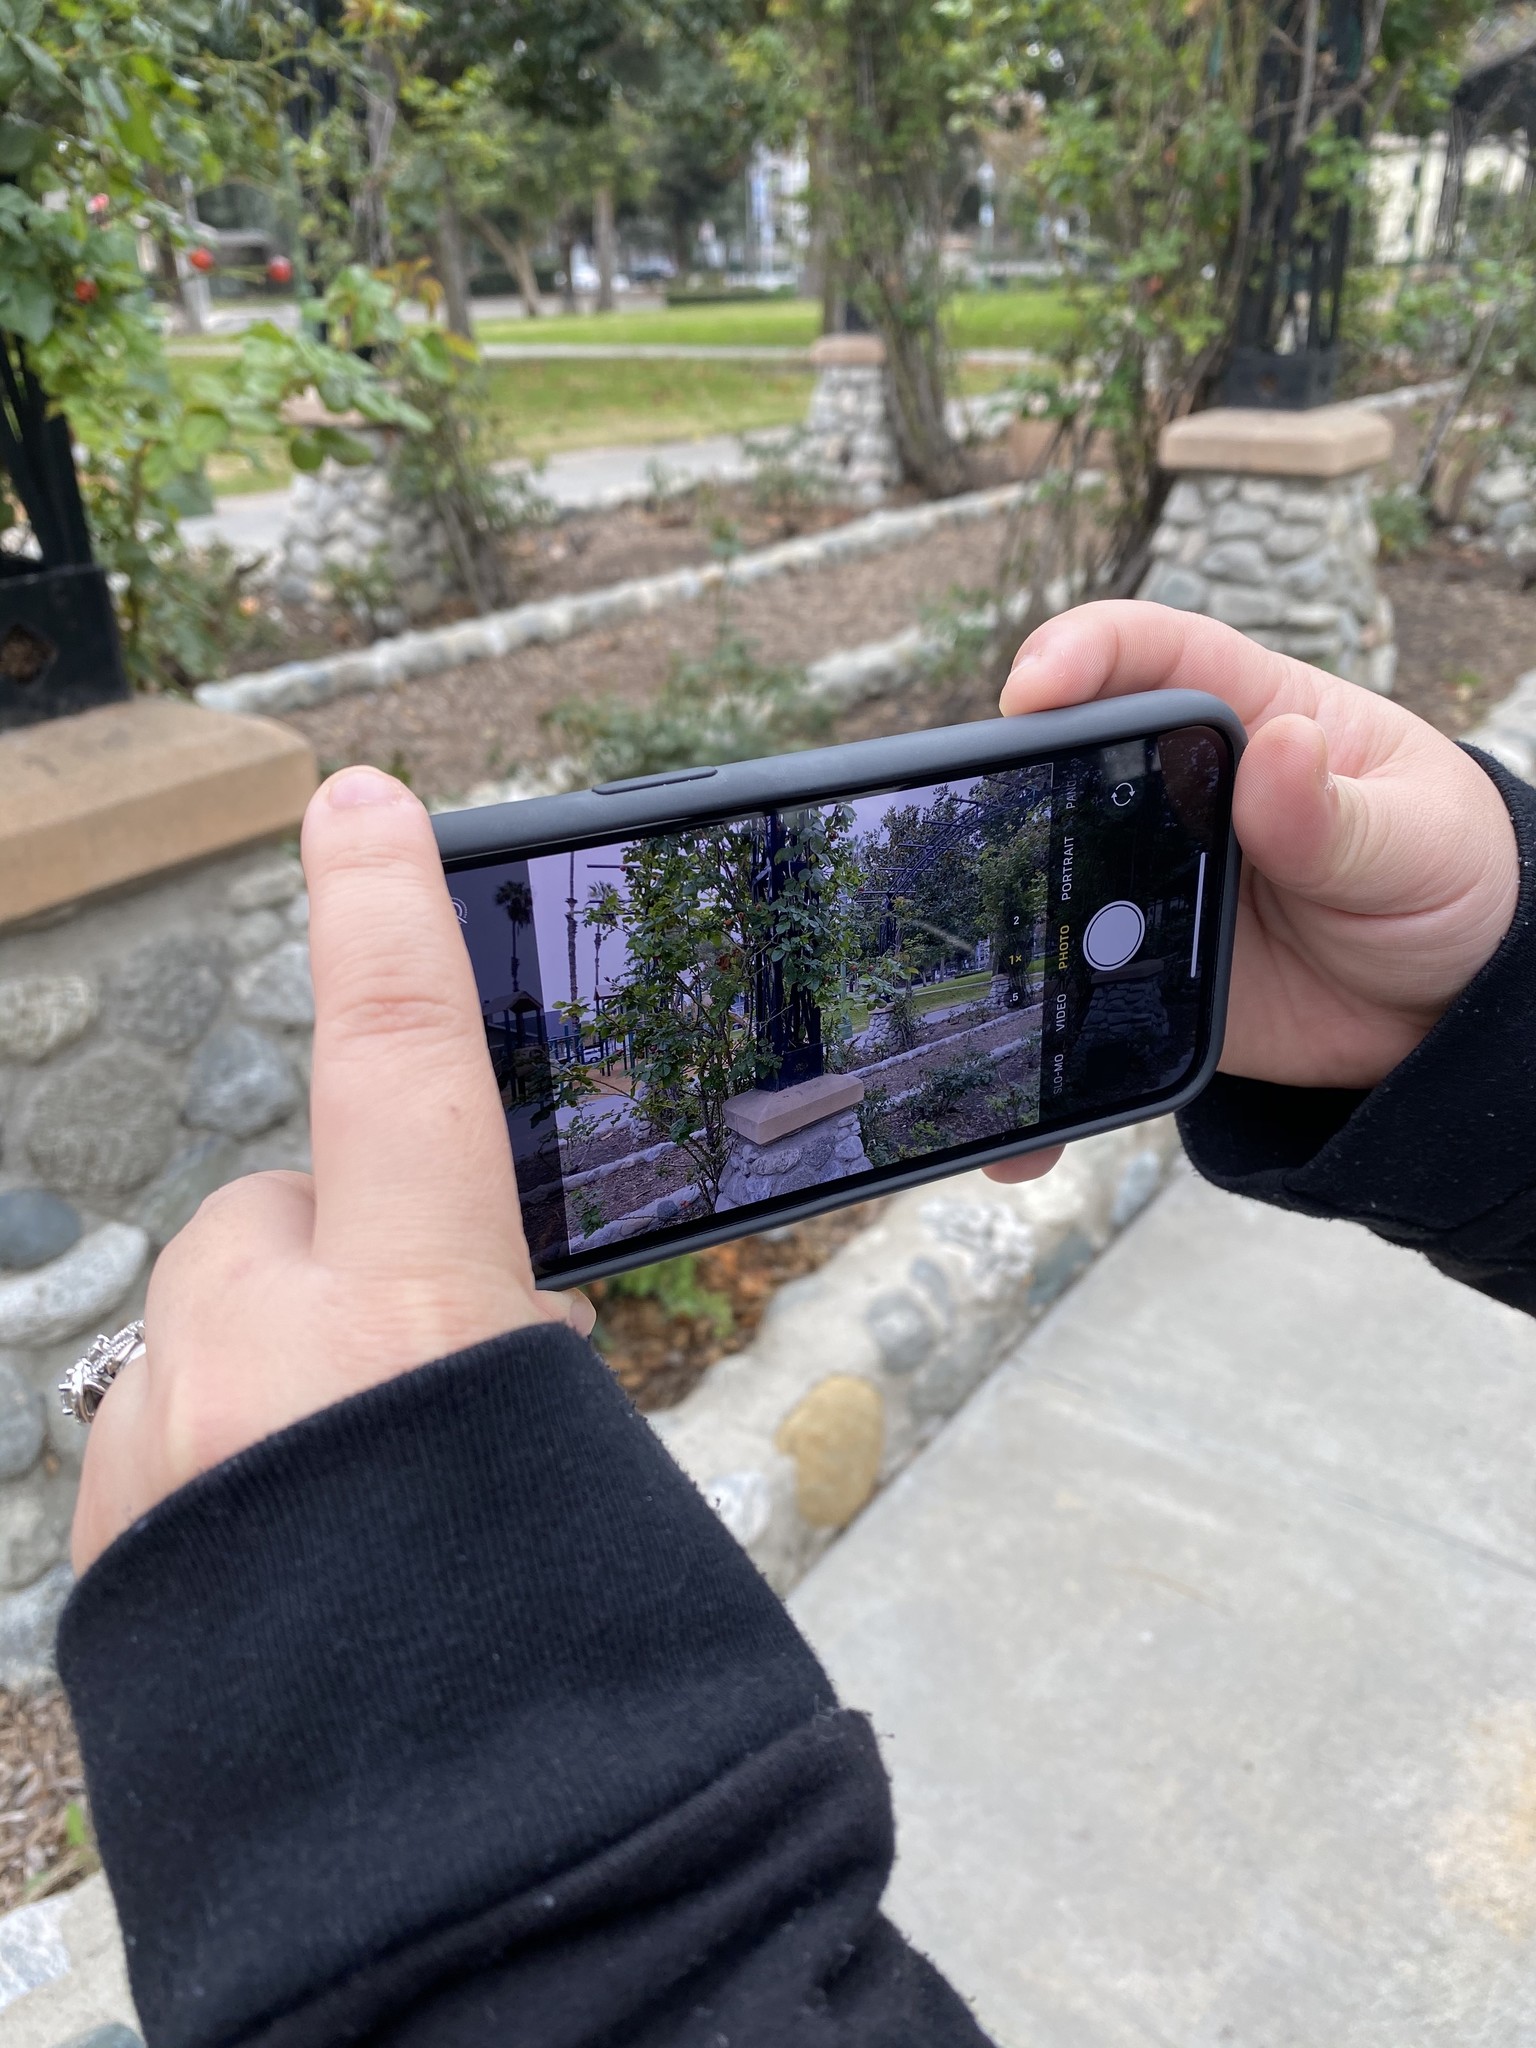 Taking a photo with the iPhone 11 Pro Smart Battery Case